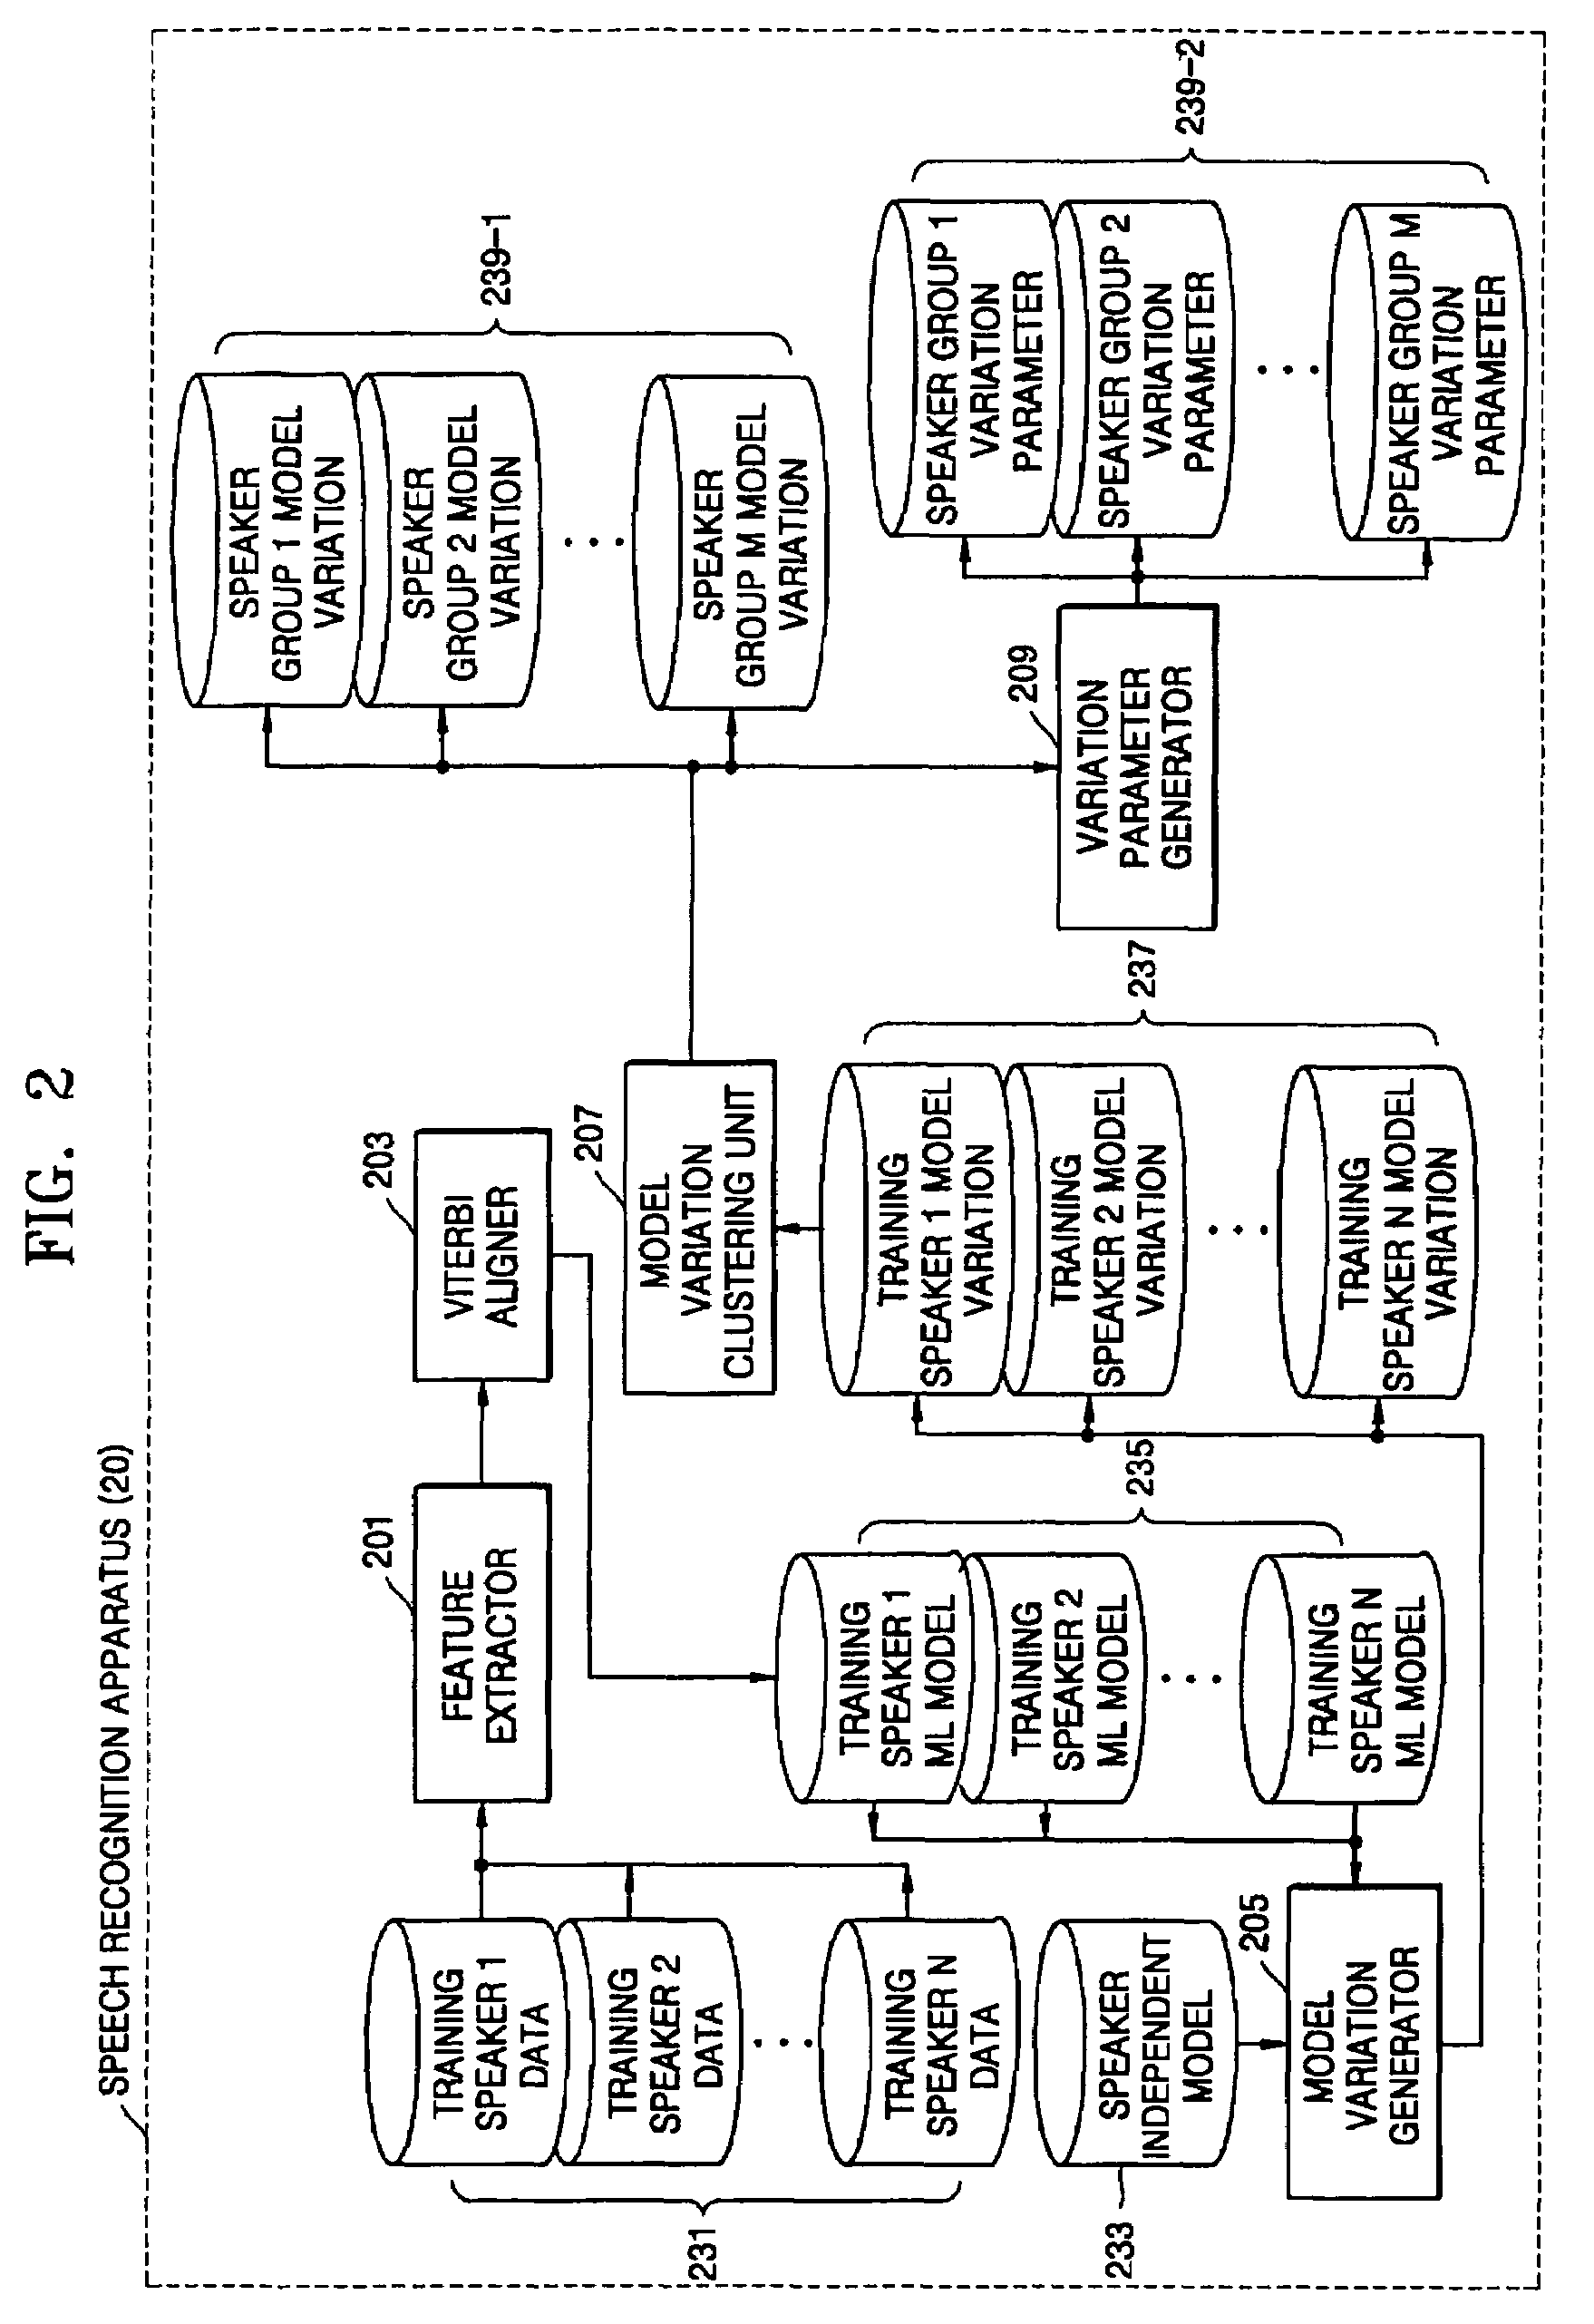 Speaker clustering and adaptation method based on the HMM model variation information and its apparatus for speech recognition